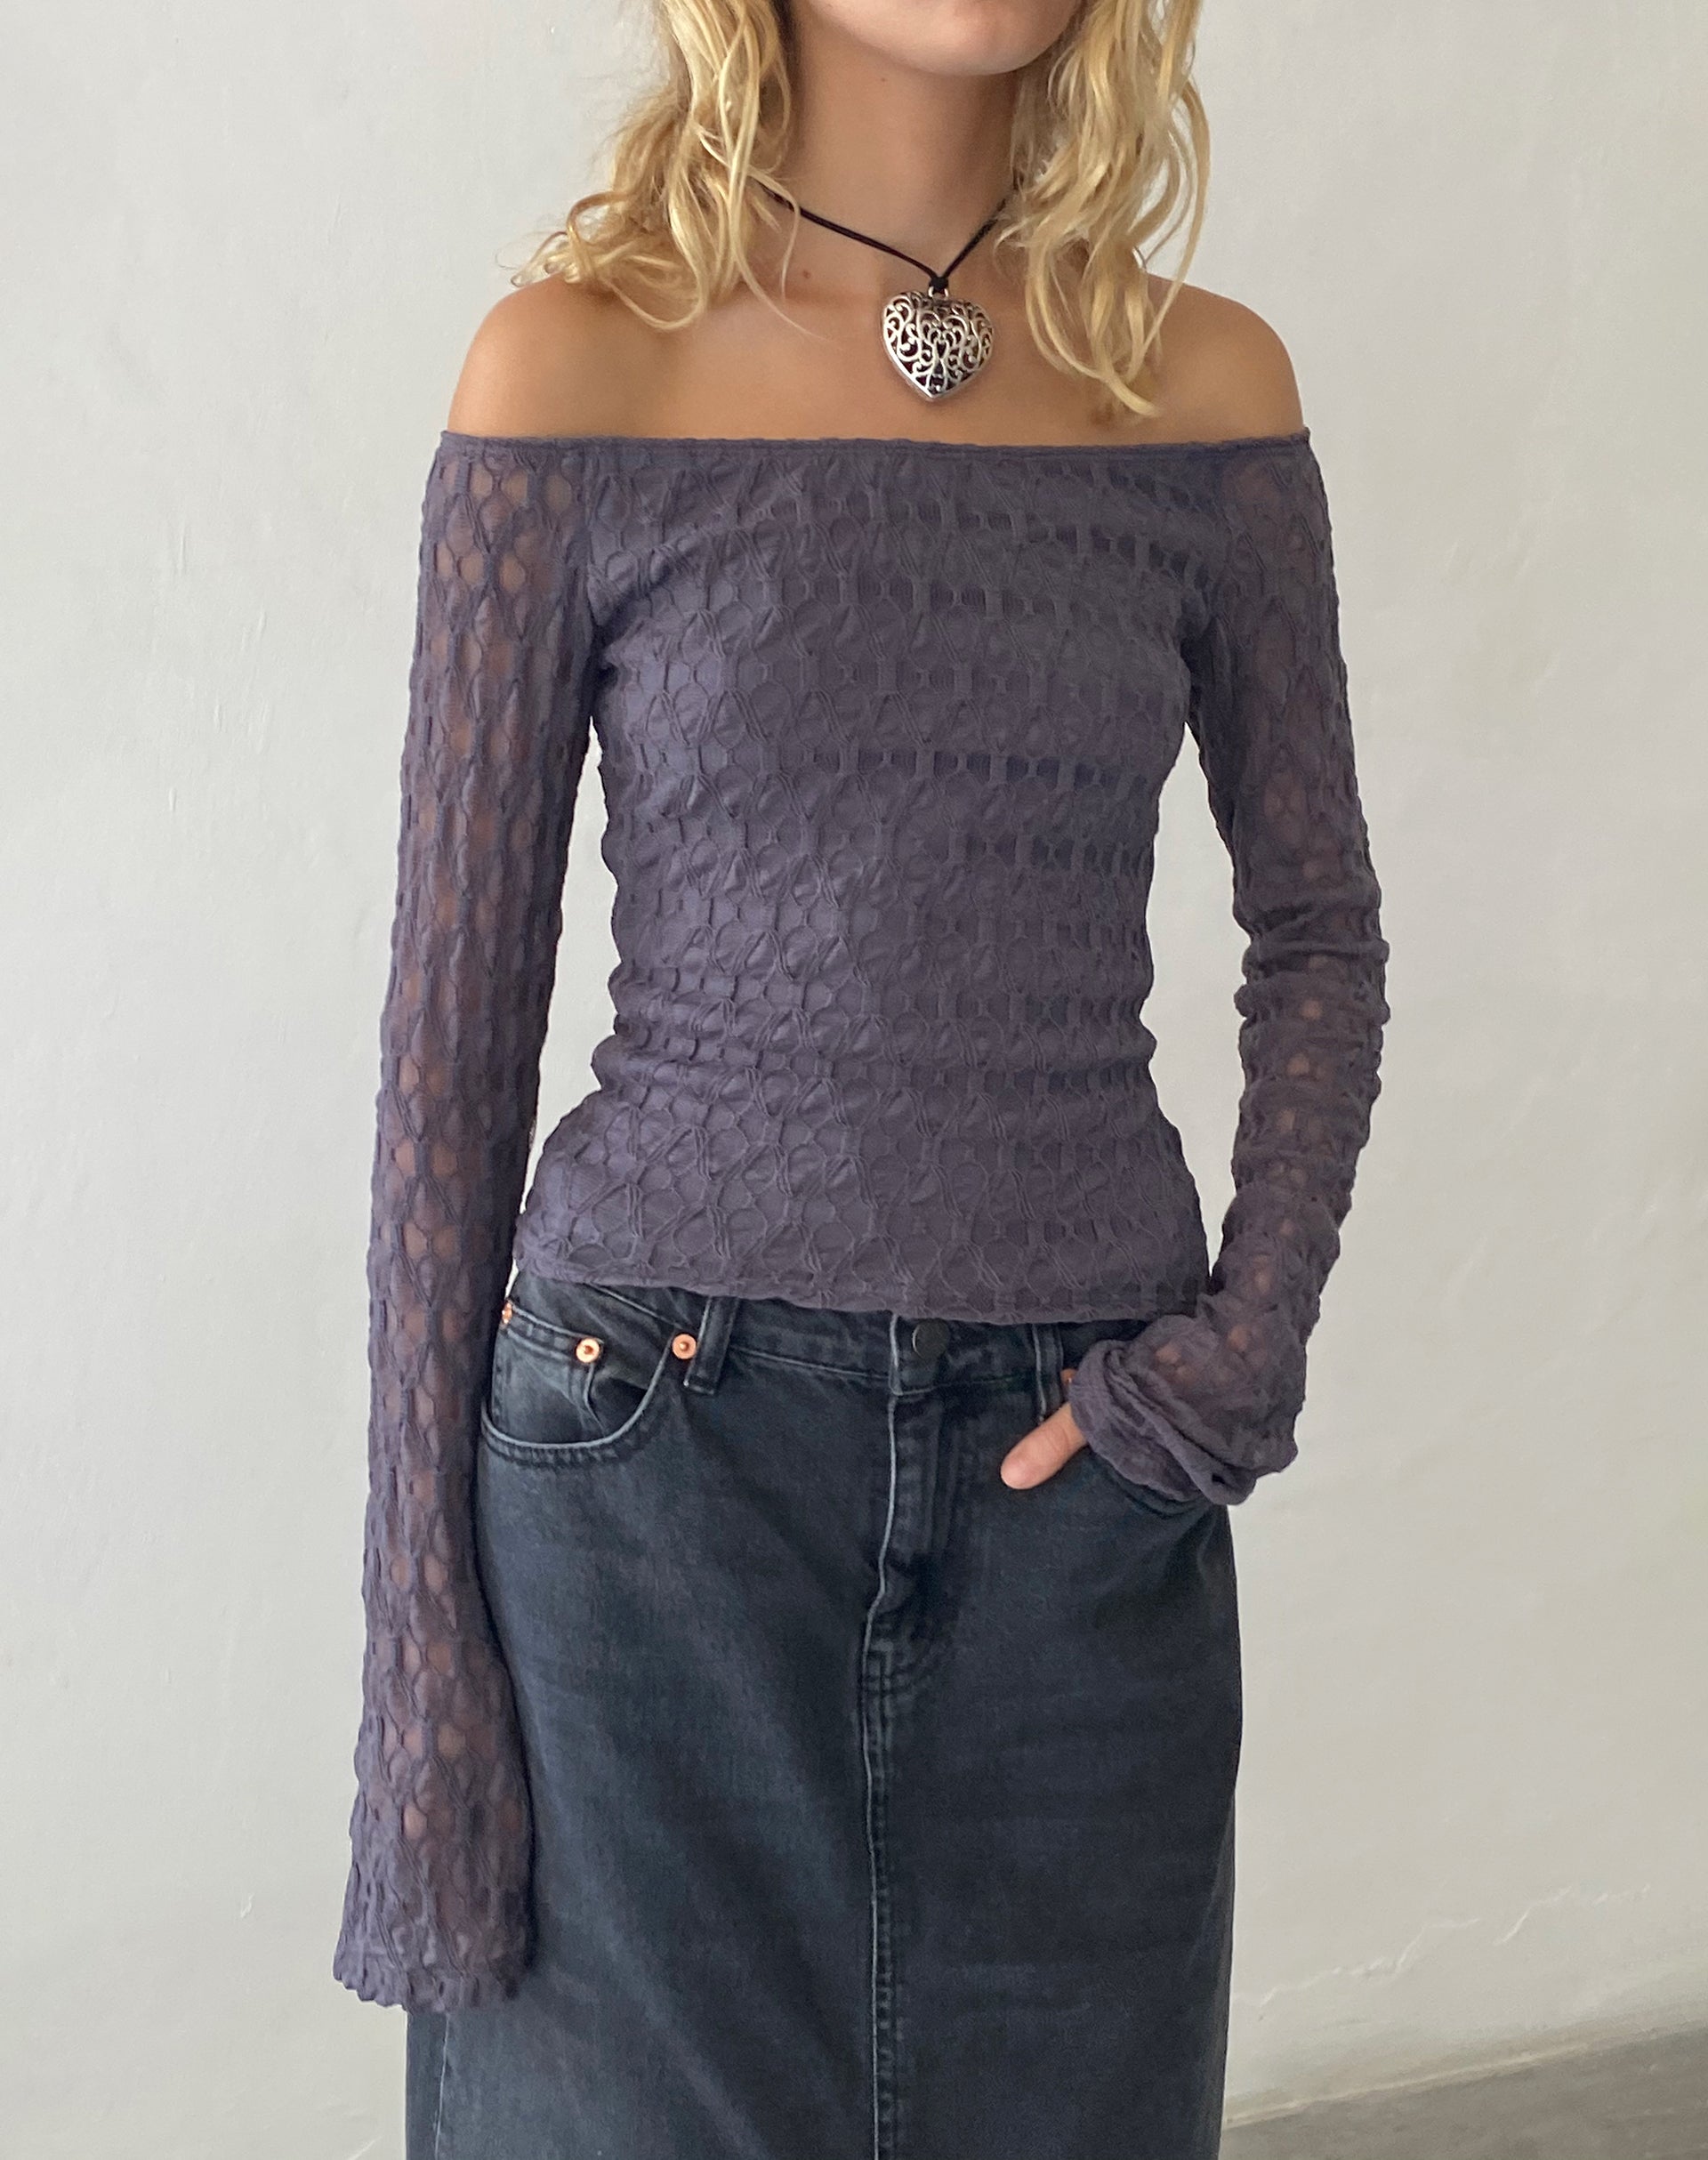 Image of Neira Long Sleeve Bardot Top in Textured Knit Ocean Storm